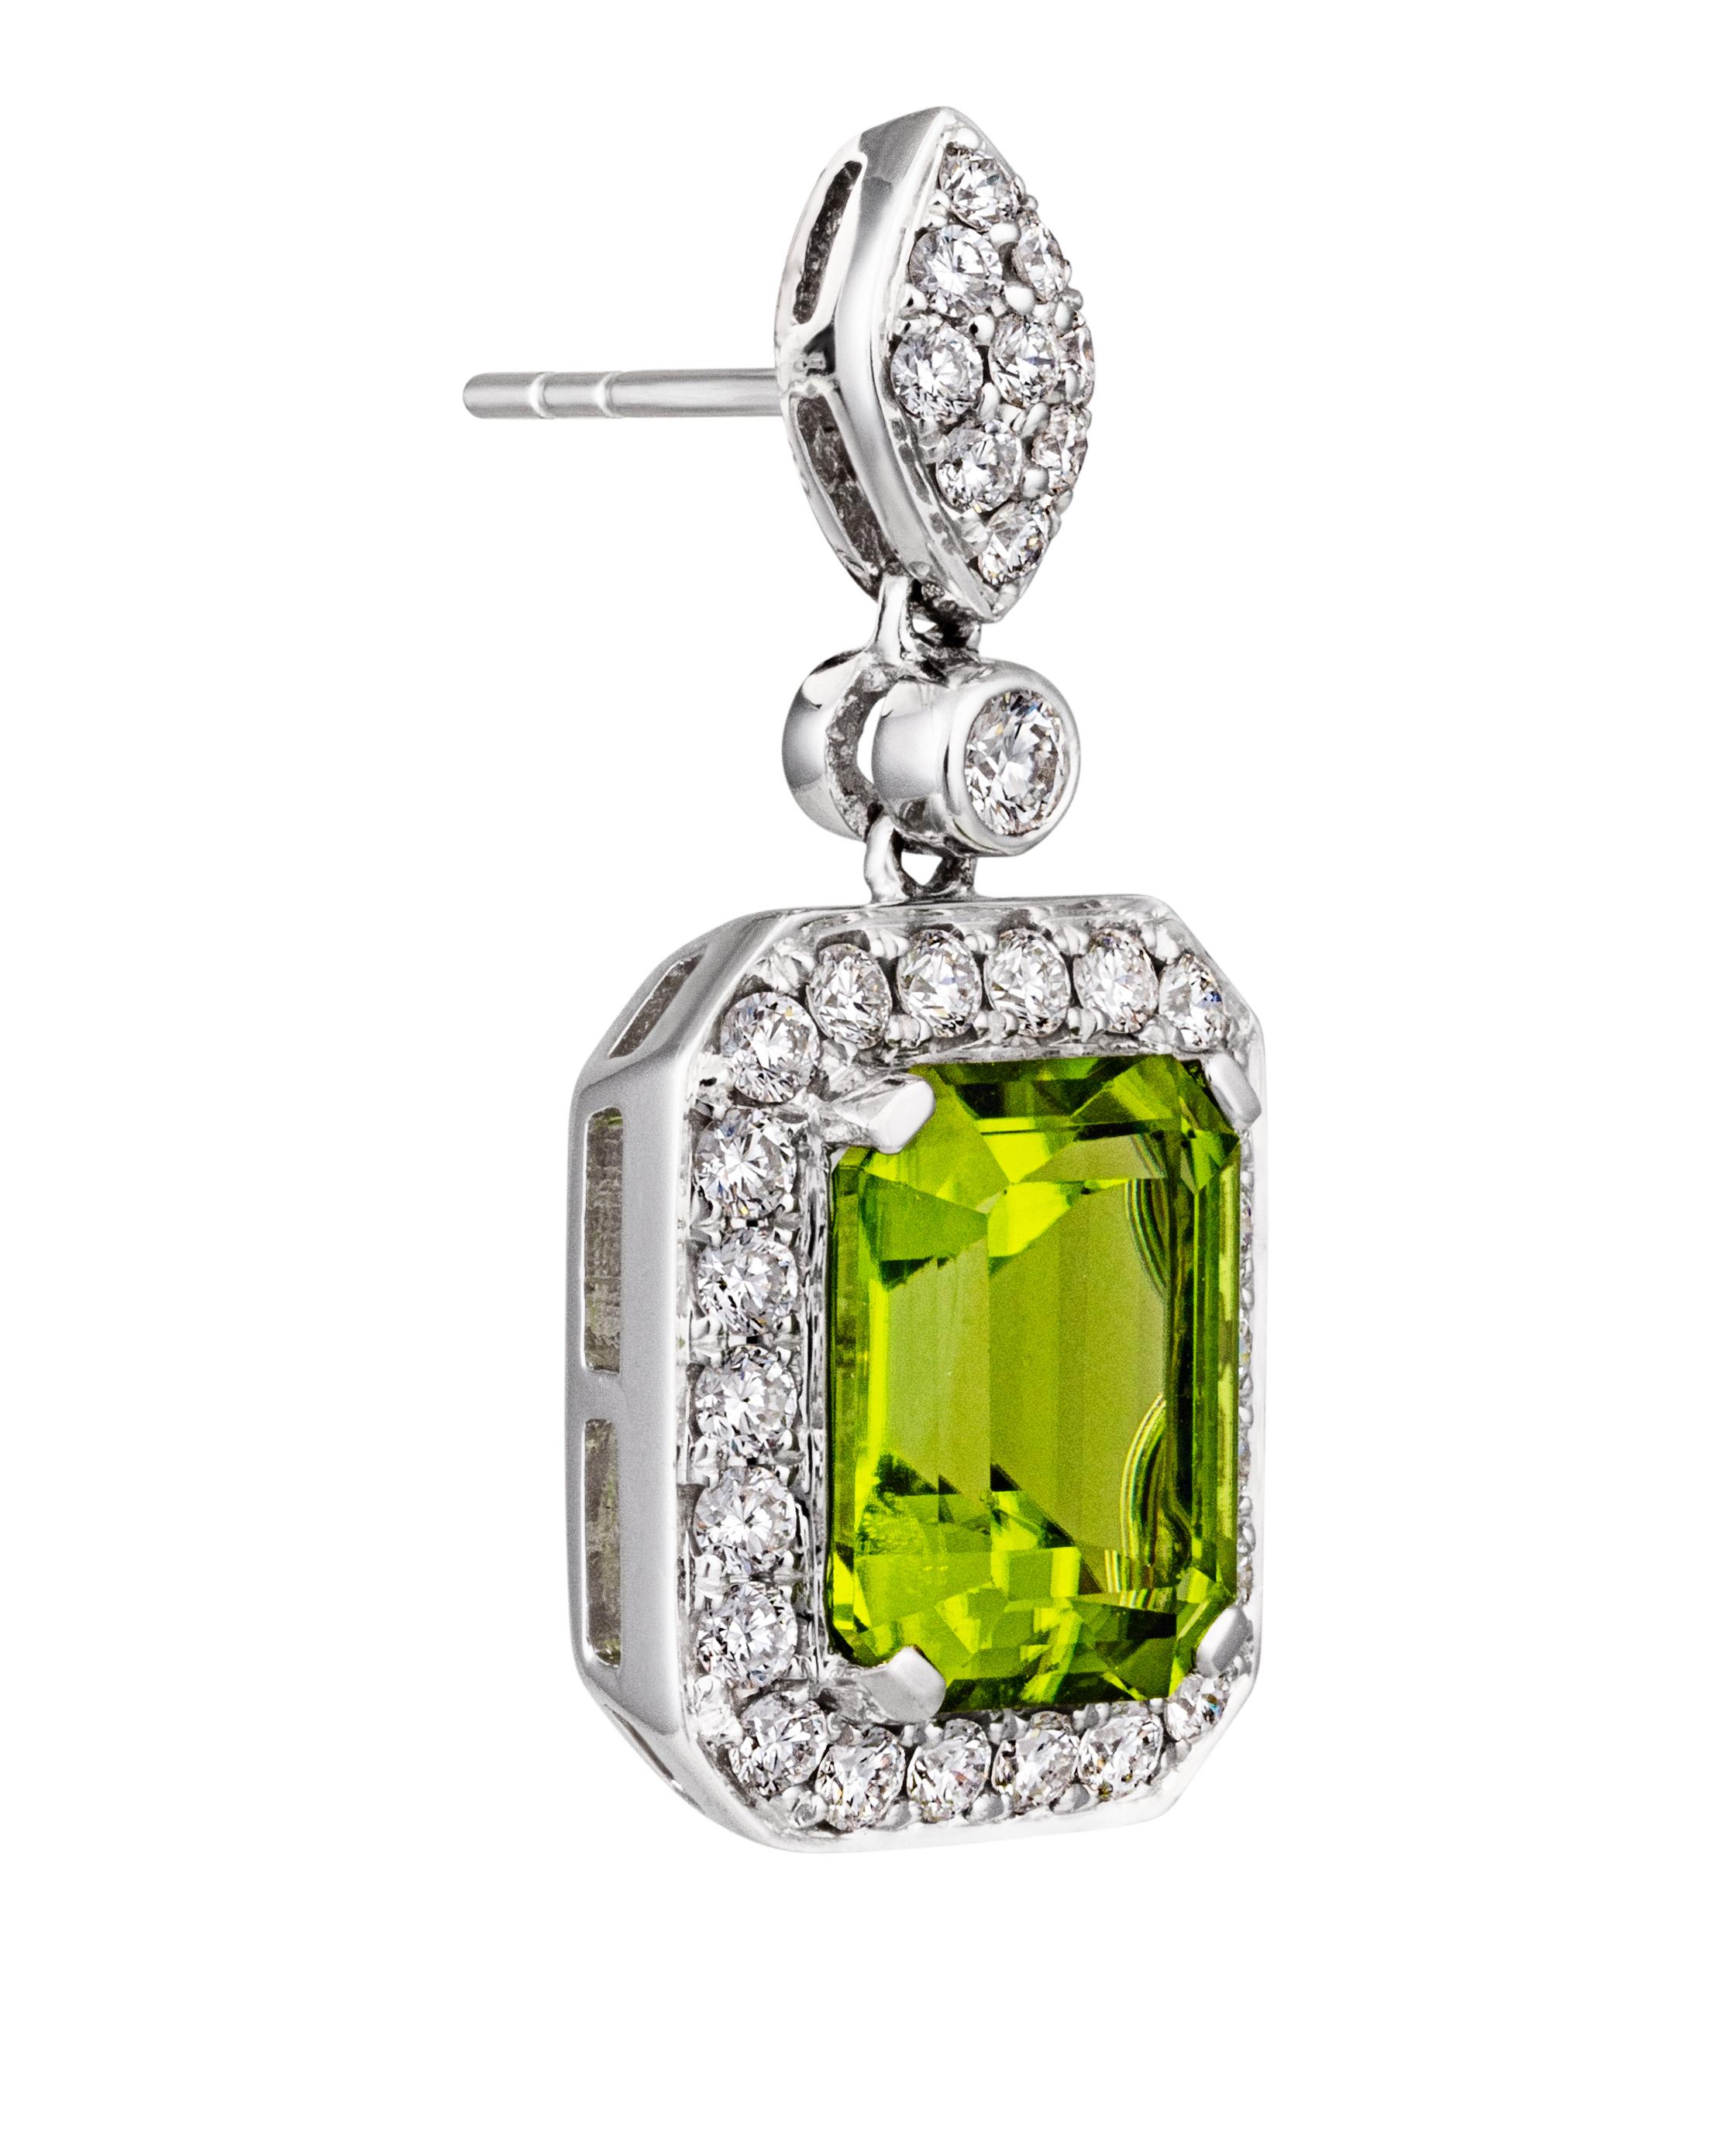 Beautiful 5.18cttw Peridot Gems surrounded by .86cttw Diamonds on 18kt White Gold Hooks. With the highest quality materials and intricate design, these earrings will make you feel like you're a royal in the Renaissance Age. Only one pair is